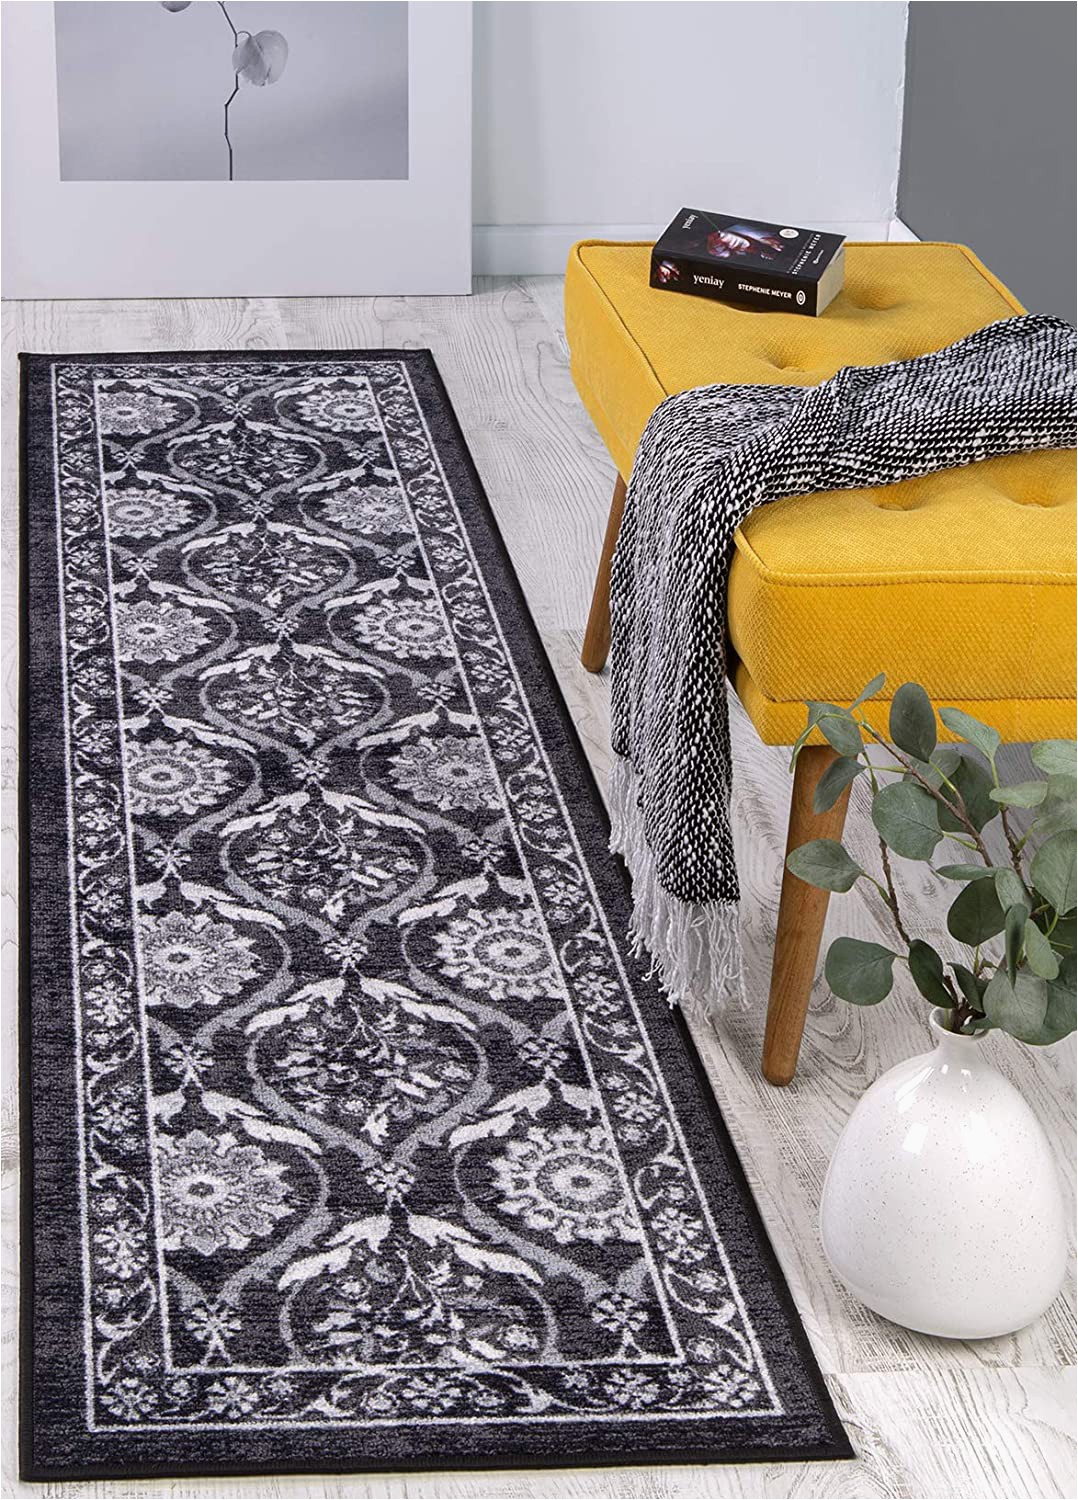 Area Rugs with Non Slip Backing Antep Rugs Casa Azul Collection Geometric Floral Non Skid Non Slip Low Profile Pile Rubber Backing Indoor area Rug Grey 1 8" X 4 11"